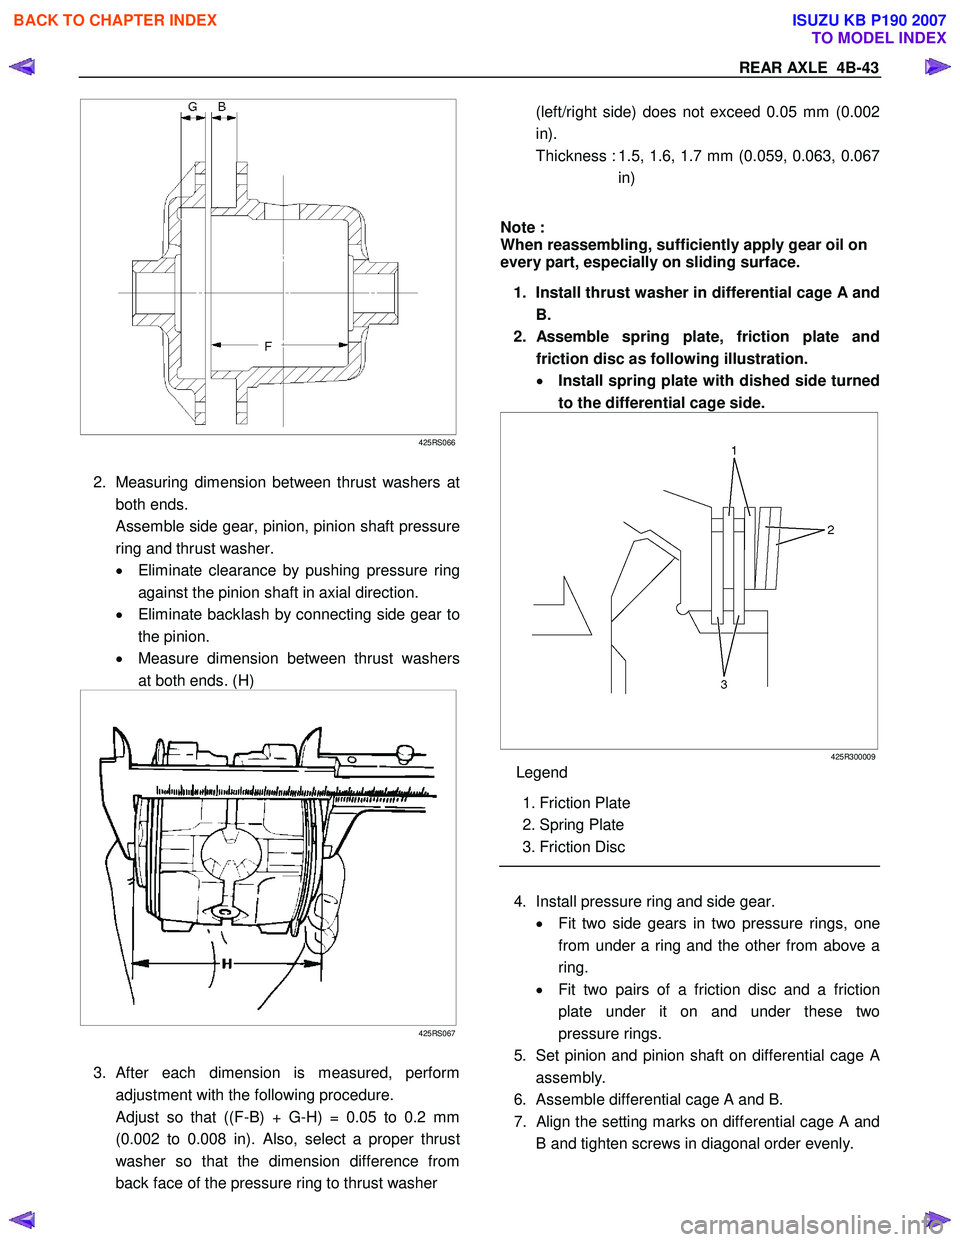 ISUZU KB P190 2007  Workshop Repair Manual REAR AXLE  4B-43 
 
 
425RS066
 
2.  Measuring dimension between thrust washers at both ends. 
 
Assemble side gear, pinion, pinion shaft pressure
ring and thrust washer.  
•  Eliminate clearance by